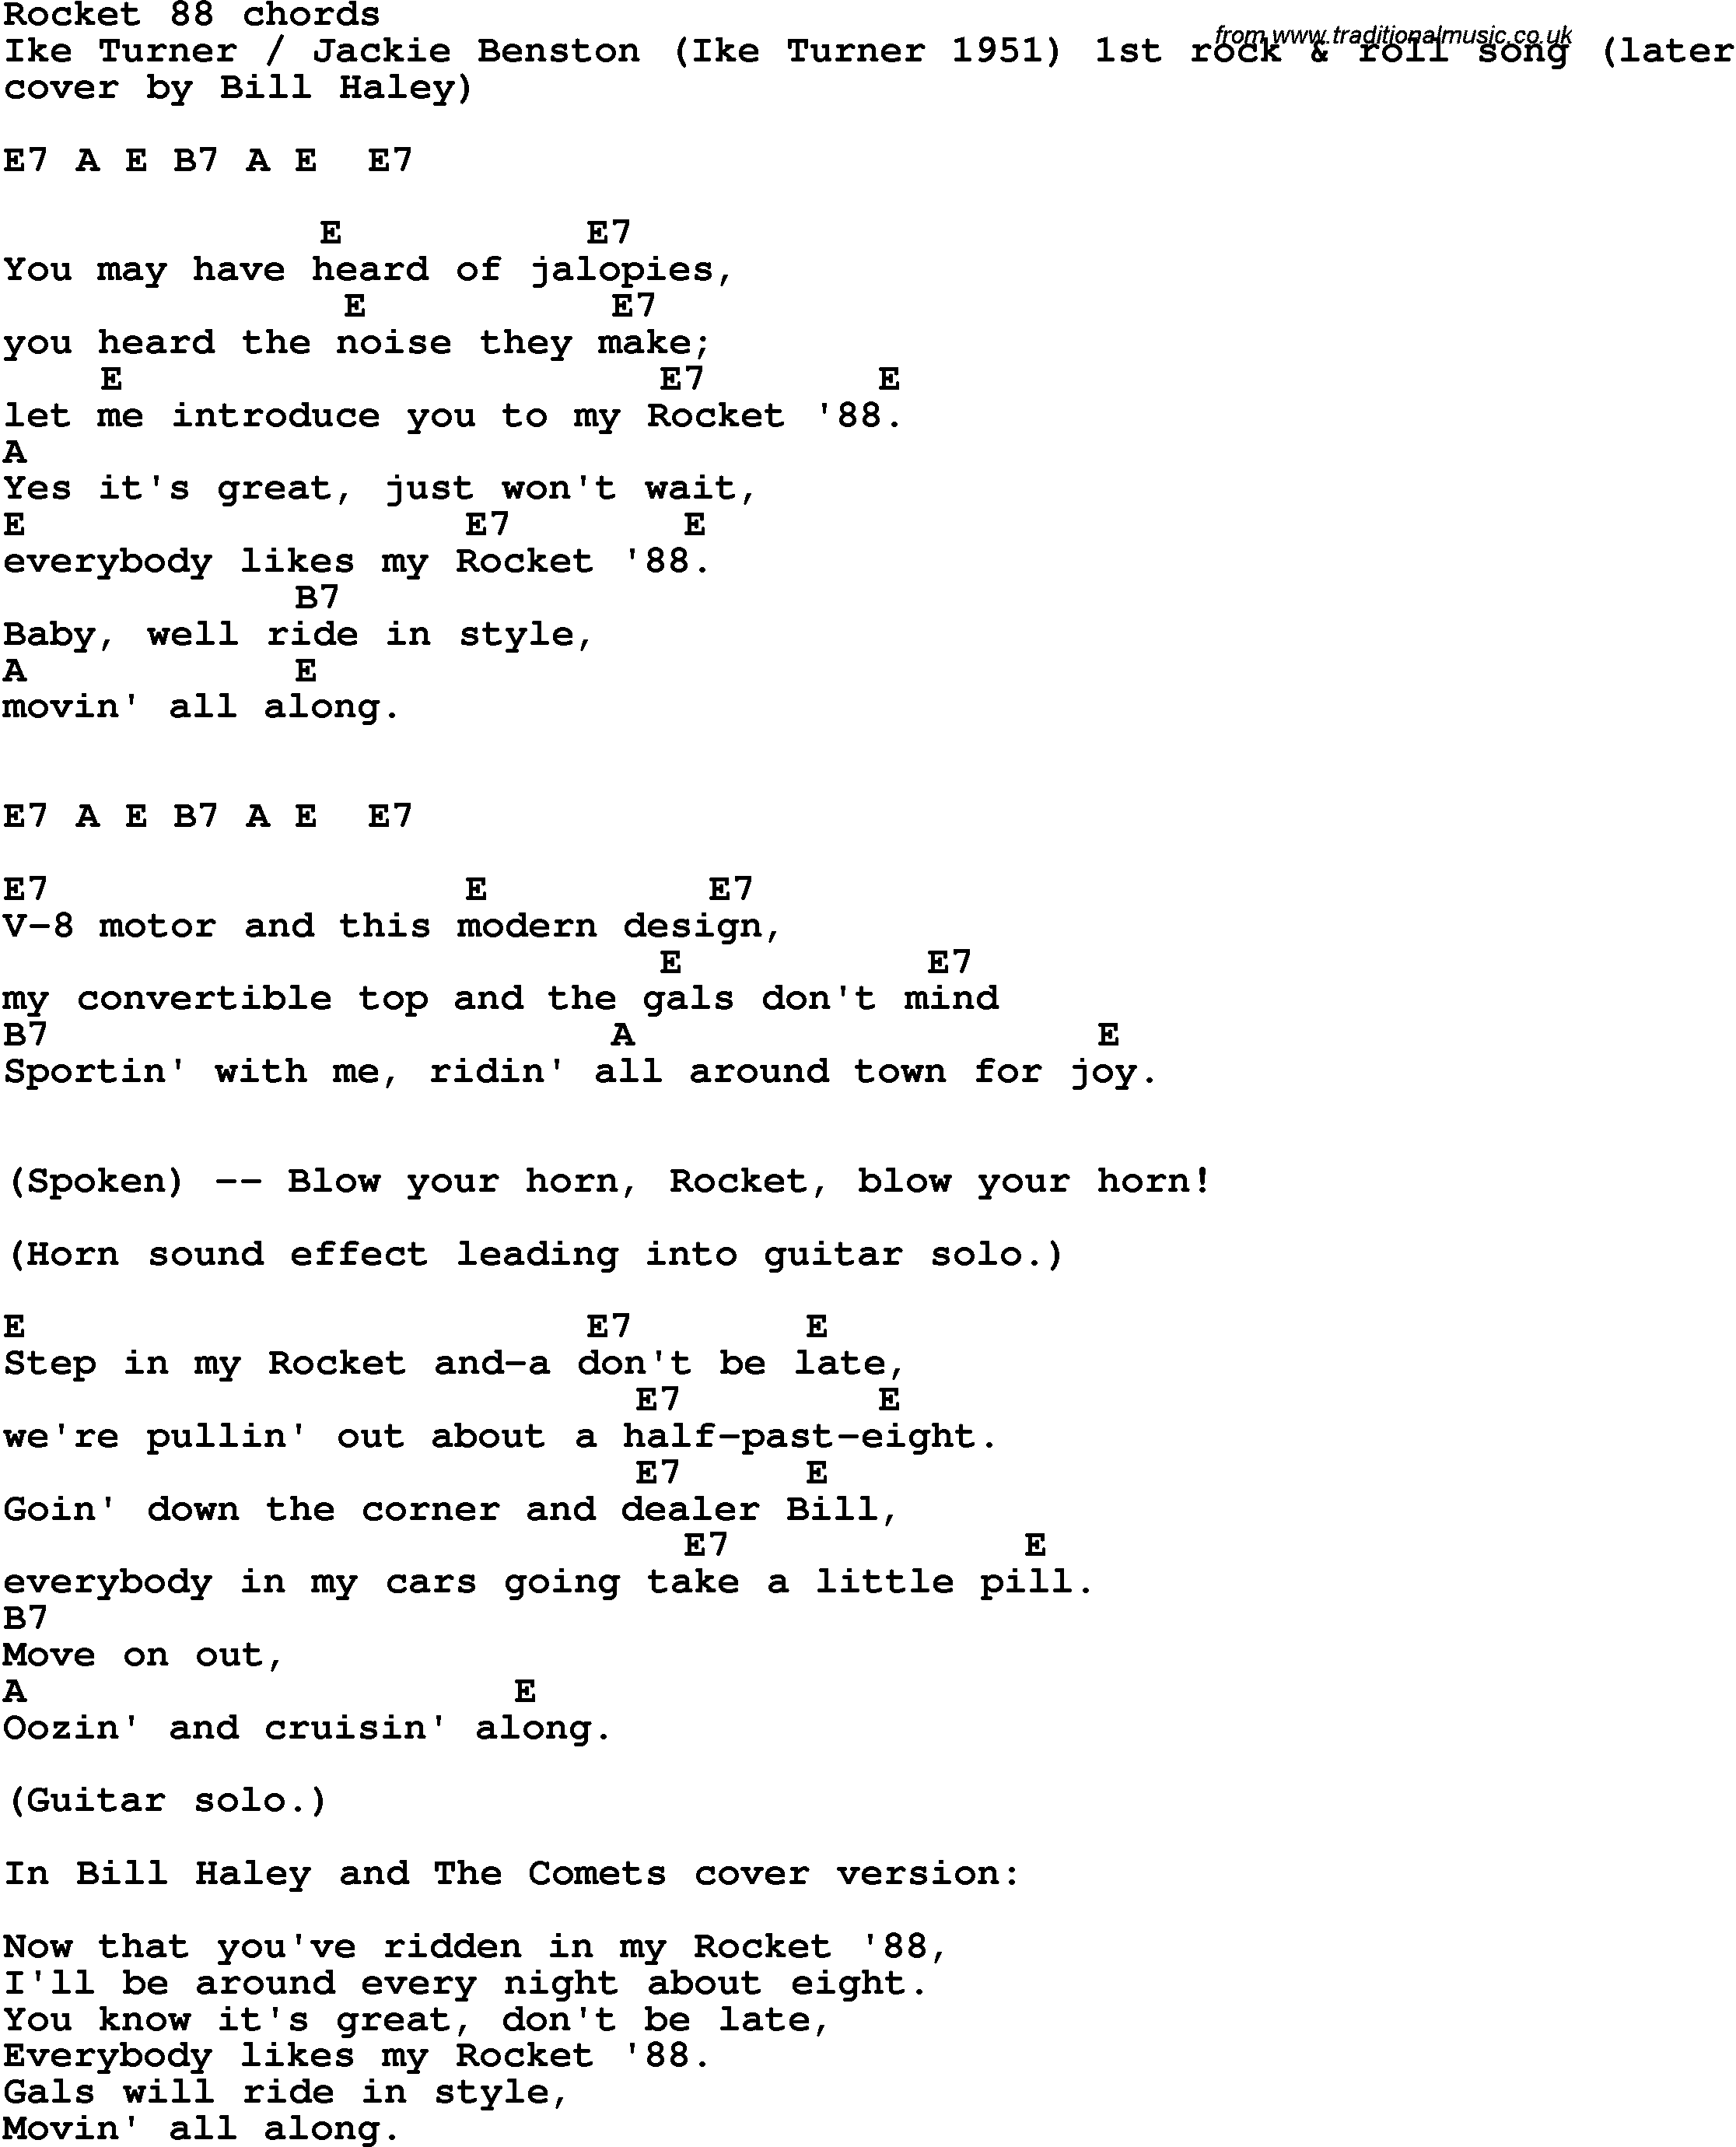 Song Lyrics with guitar chords for Rocket